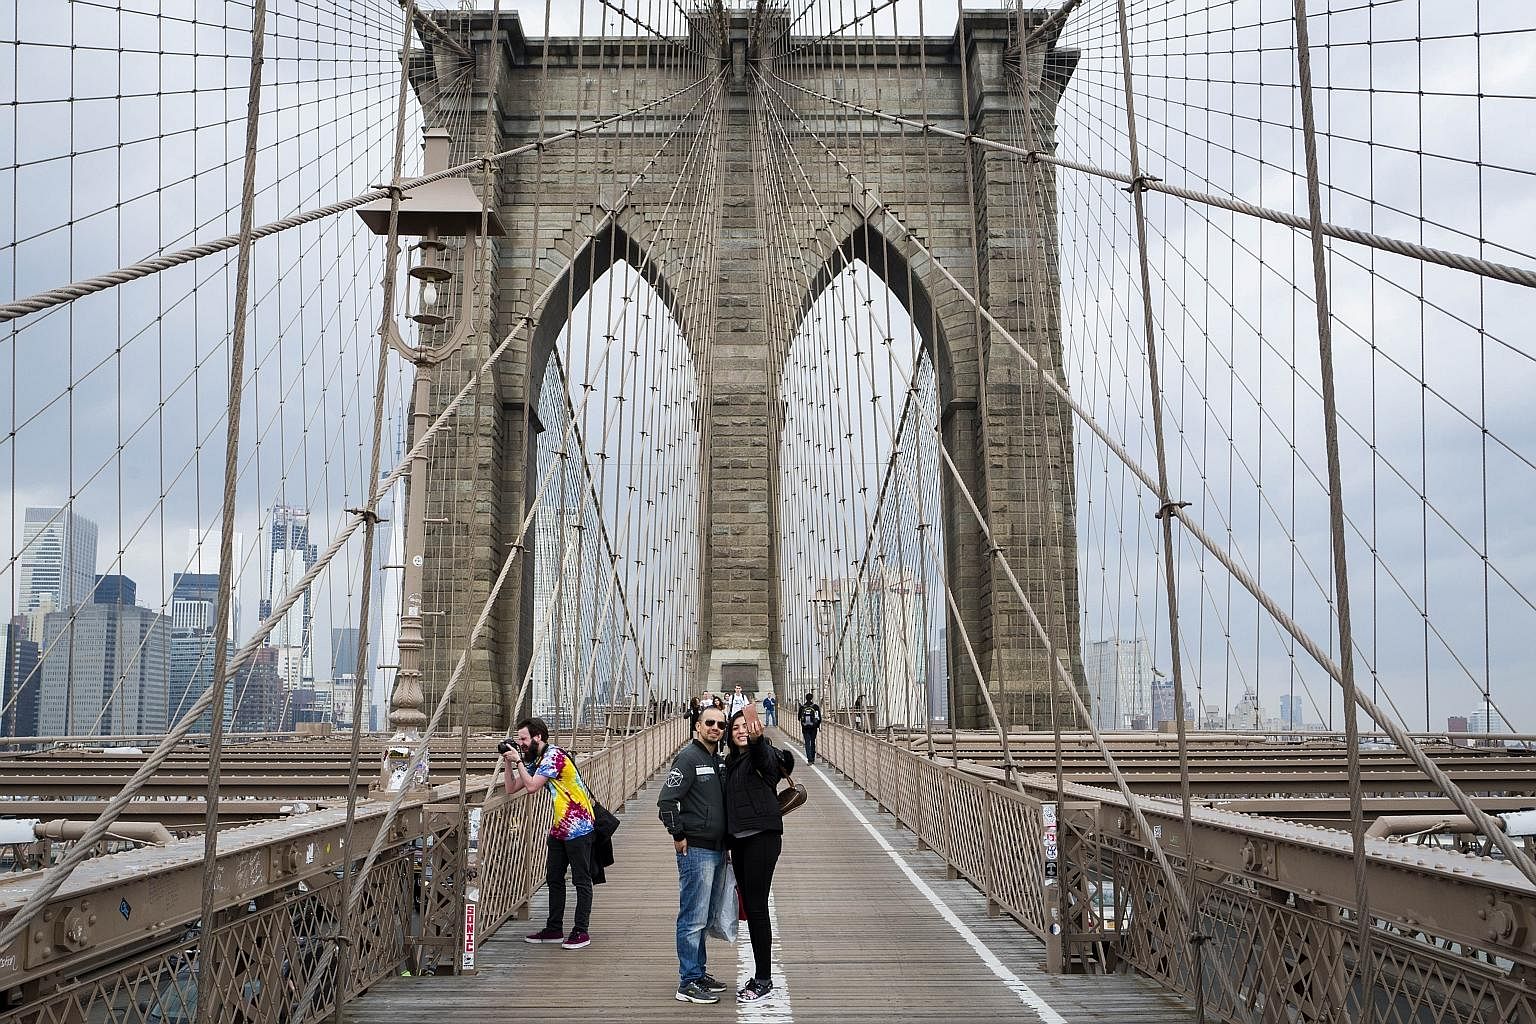 Thousands traipse across New York City's iconic Brooklyn Bridge every day, but the 146-year-old bridge is "structurally deficient", says the American Road and Transportation Builders Association.